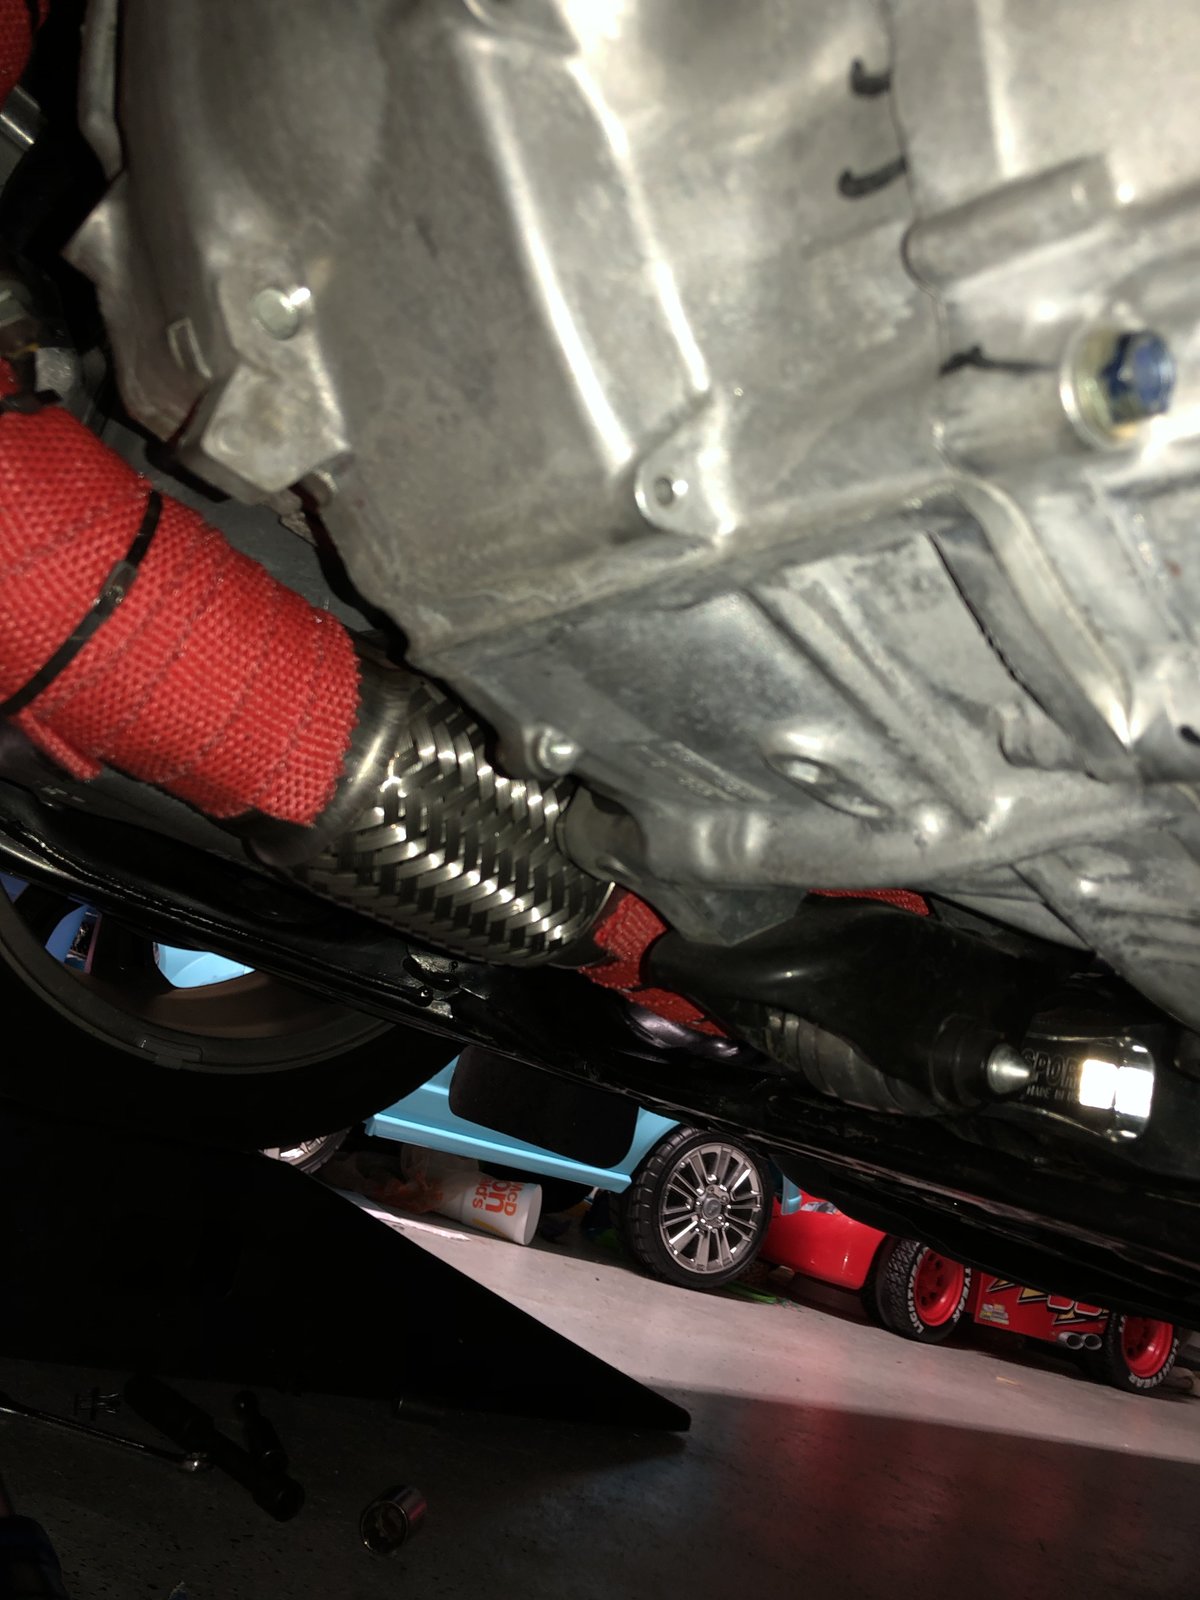 11th Gen Honda Civic Redline360 Downpipes for the Civic and Civic Si 1.5L Turbo IMG_1529.JPG